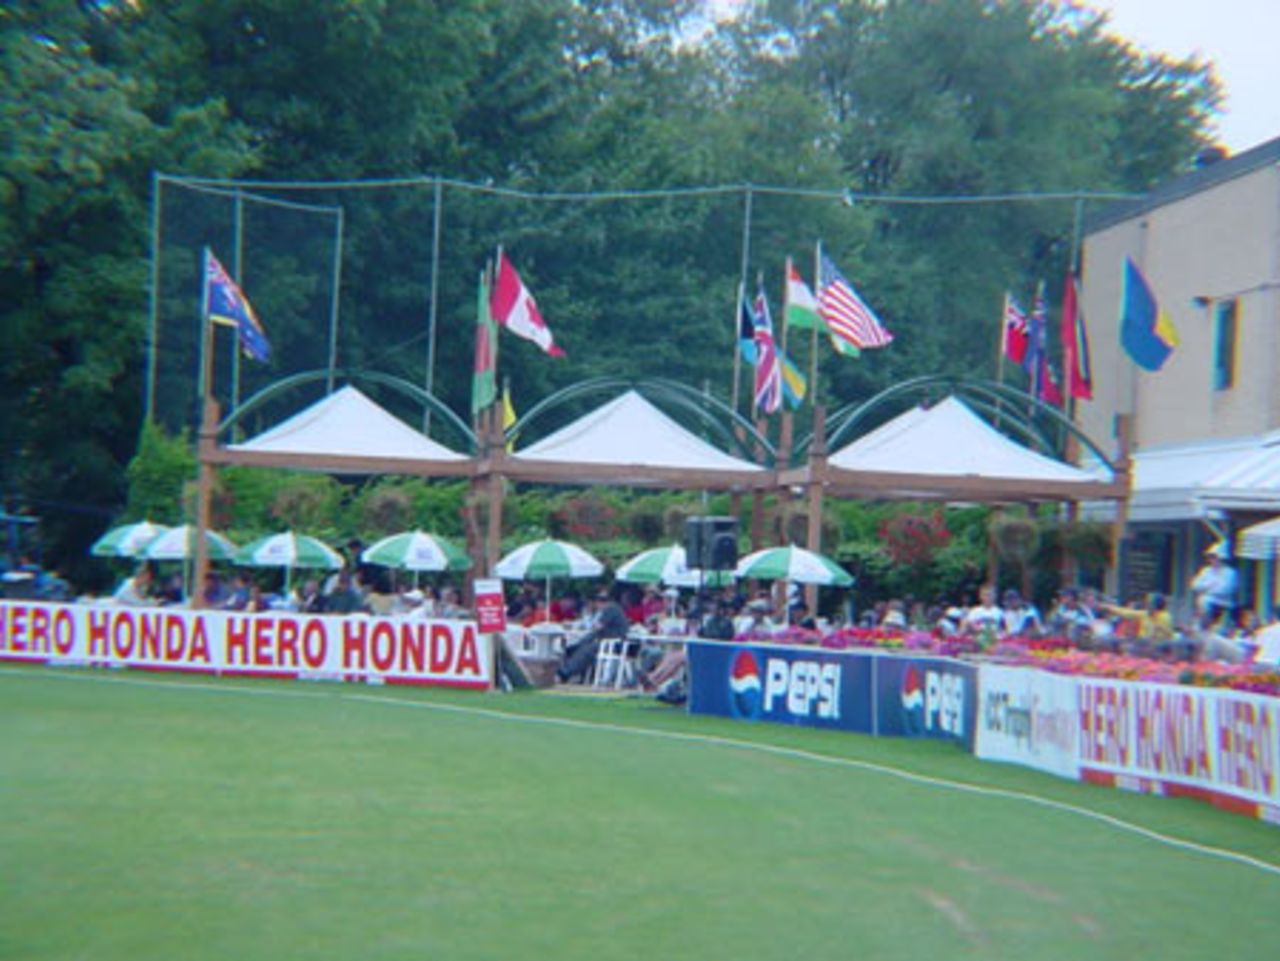 Members of the Toronto Cricket, Skating and Curling Club watch the ICC Trophy World Cup Qualifying Final. ICC Trophy 2001: Canada v Scotland, Toronto Cricket, Skating and Curling Club, 17 July 2001.